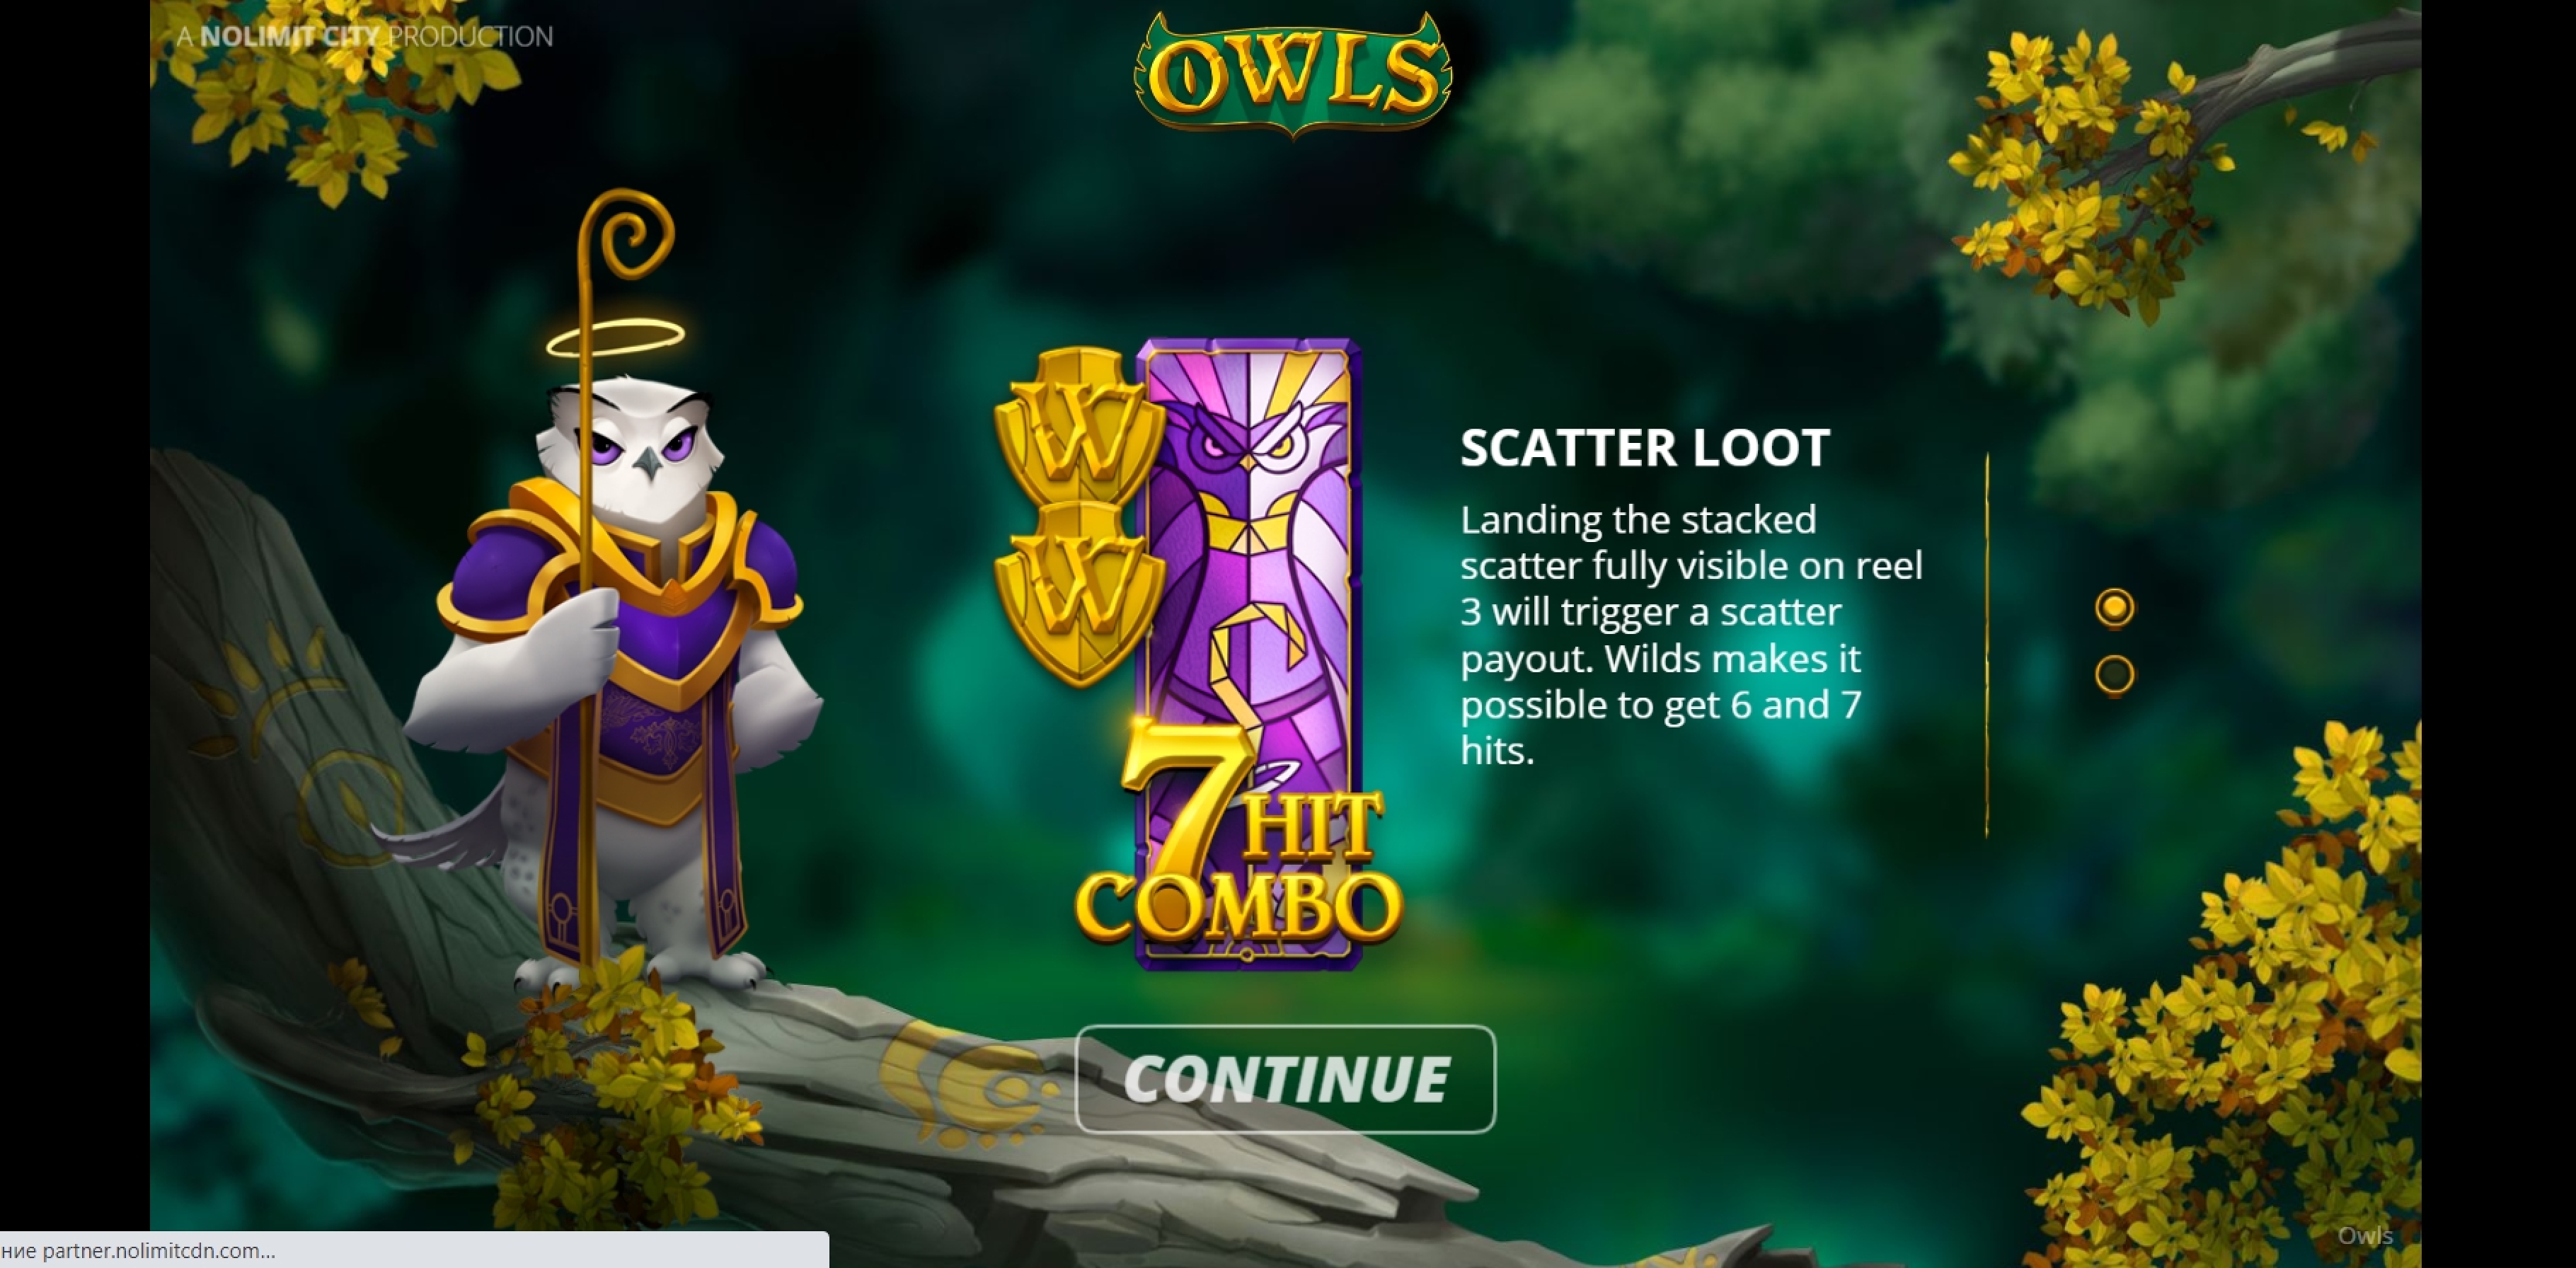 Play Owls Free Casino Slot Game by Nolimit City